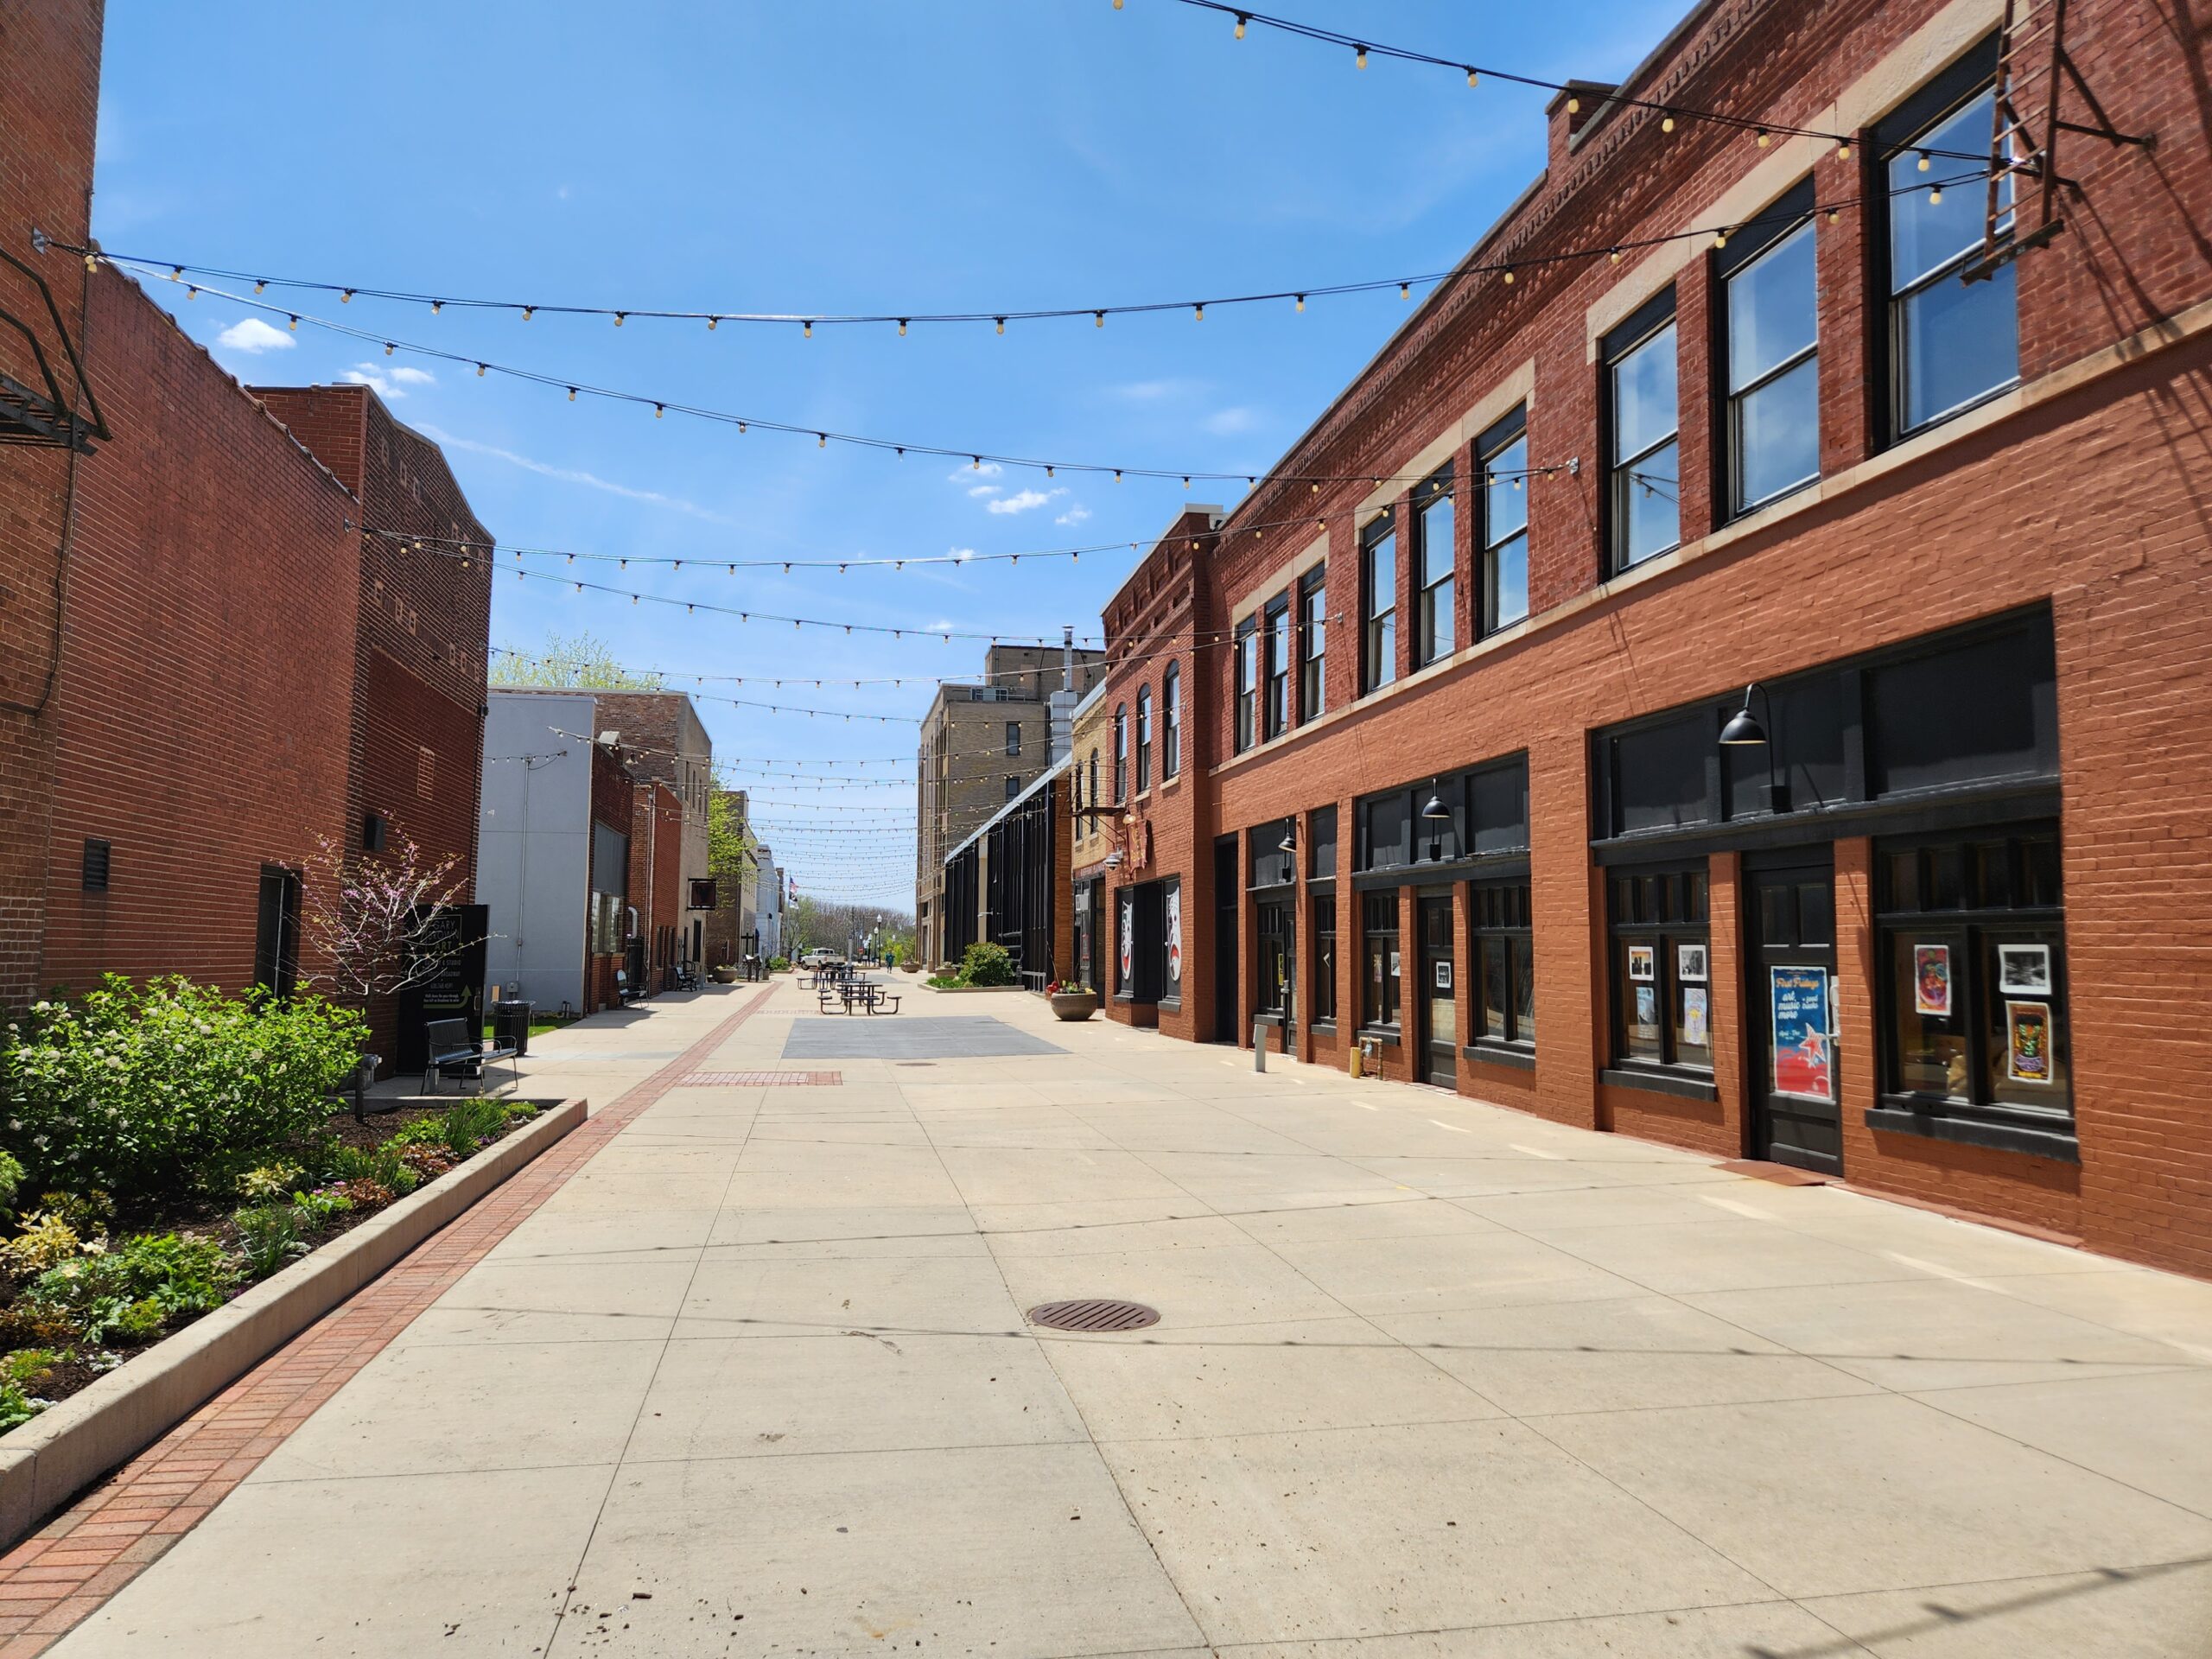 43 Galena as a plain brick building on the plaza with bistro lights above. The view is down the plaza, a walkable pedestrian area.